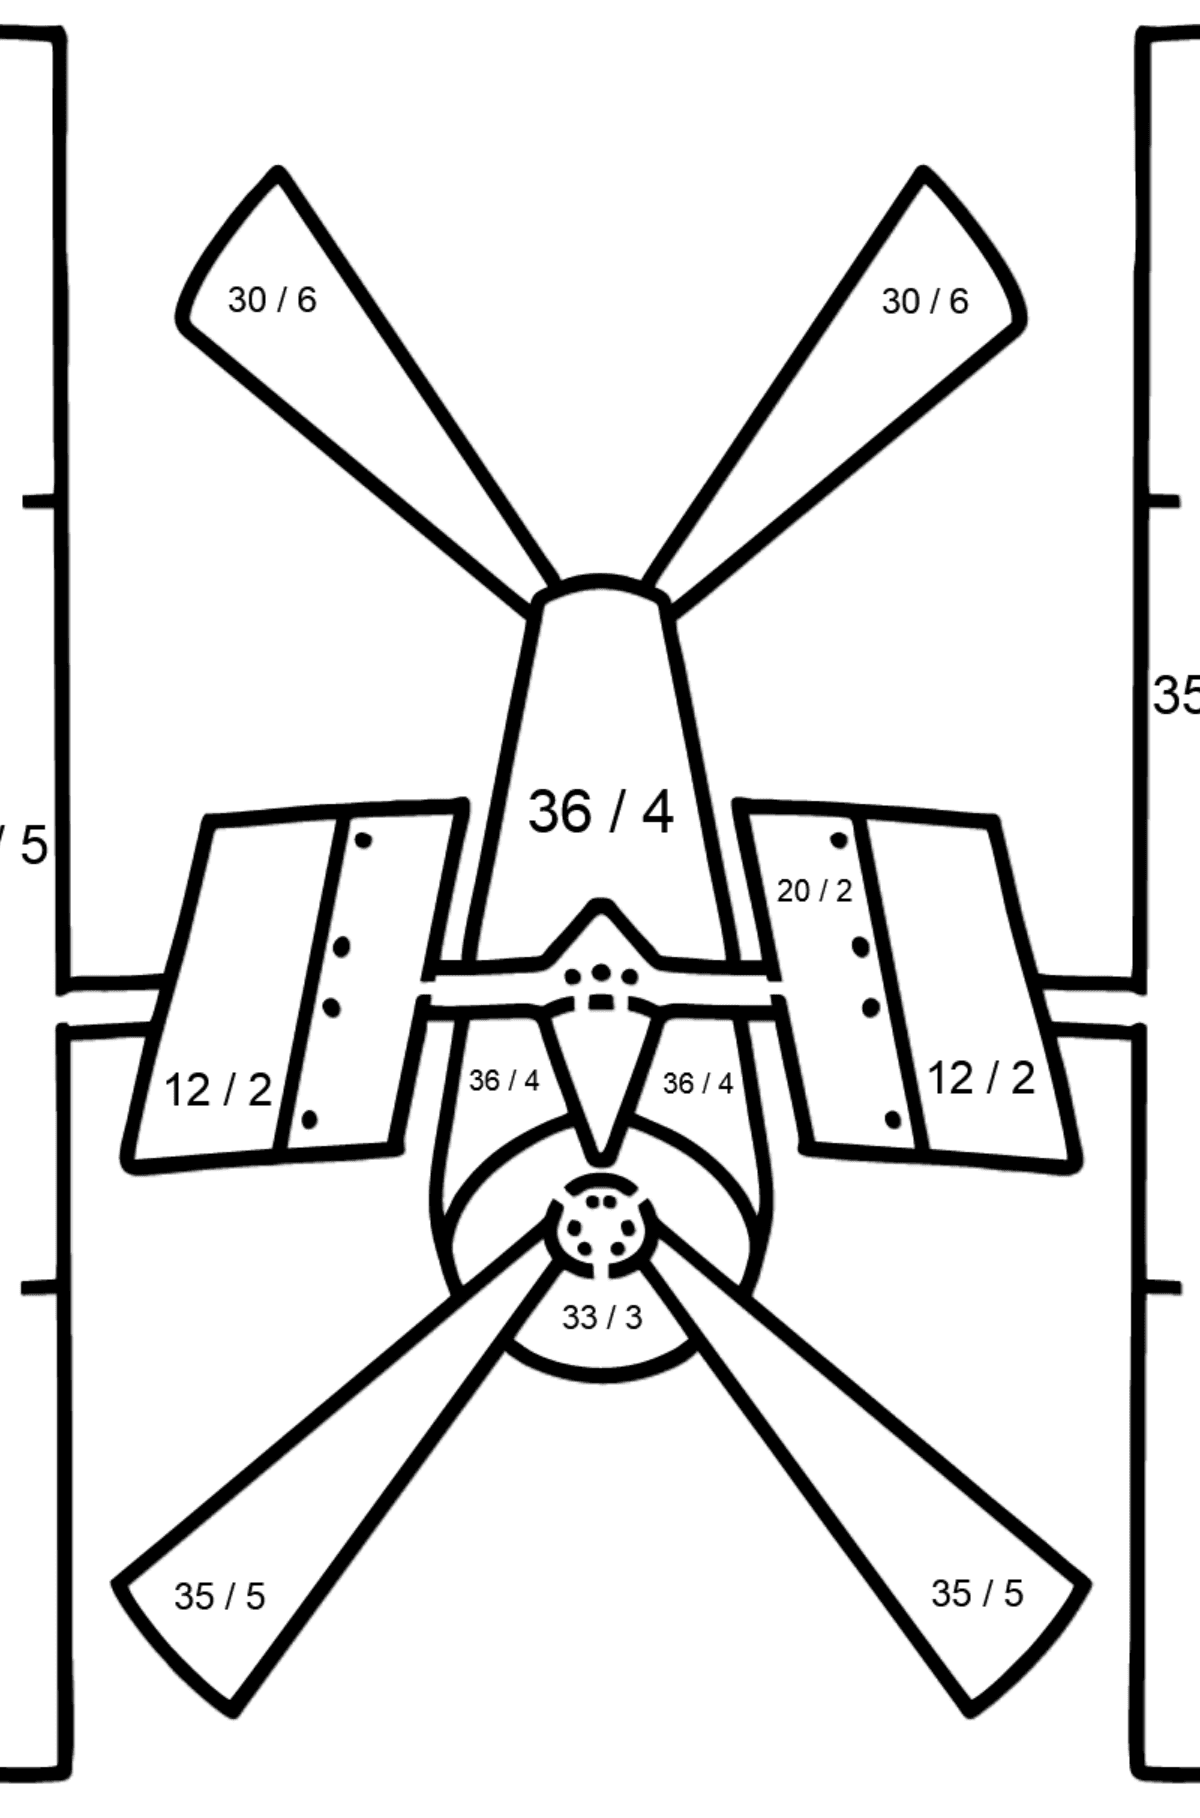 Space Station coloring page - Math Coloring - Division for Kids